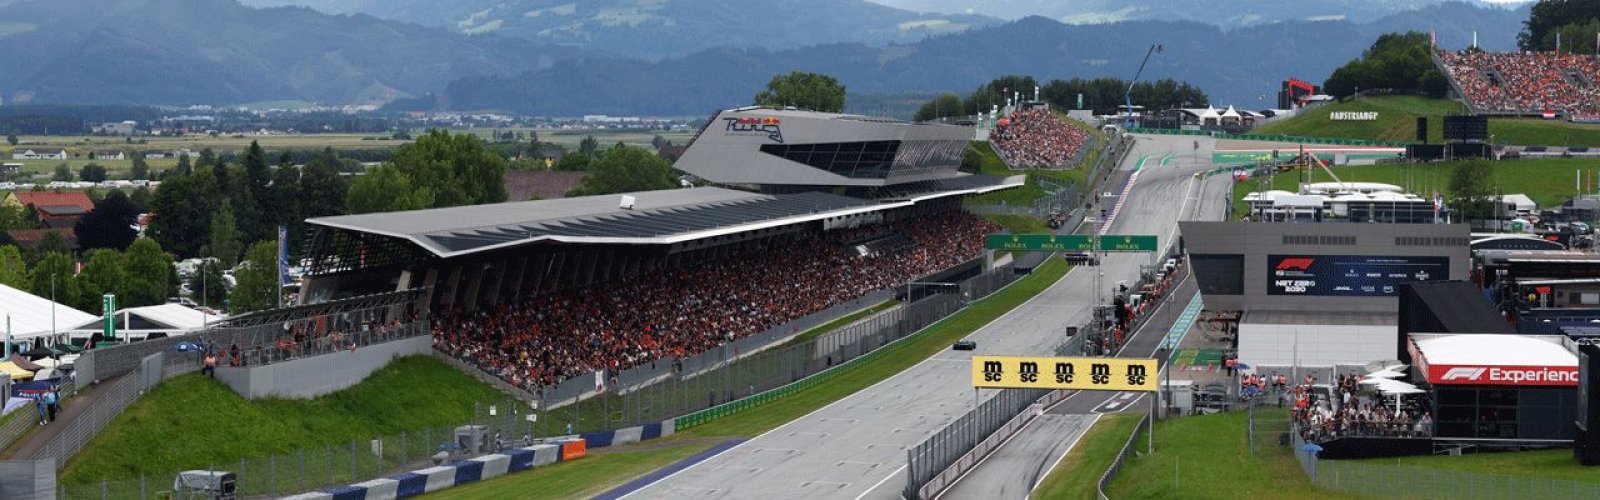 Austrian Grand Prix held at the Red Bull Ring in Spielberg, Austria